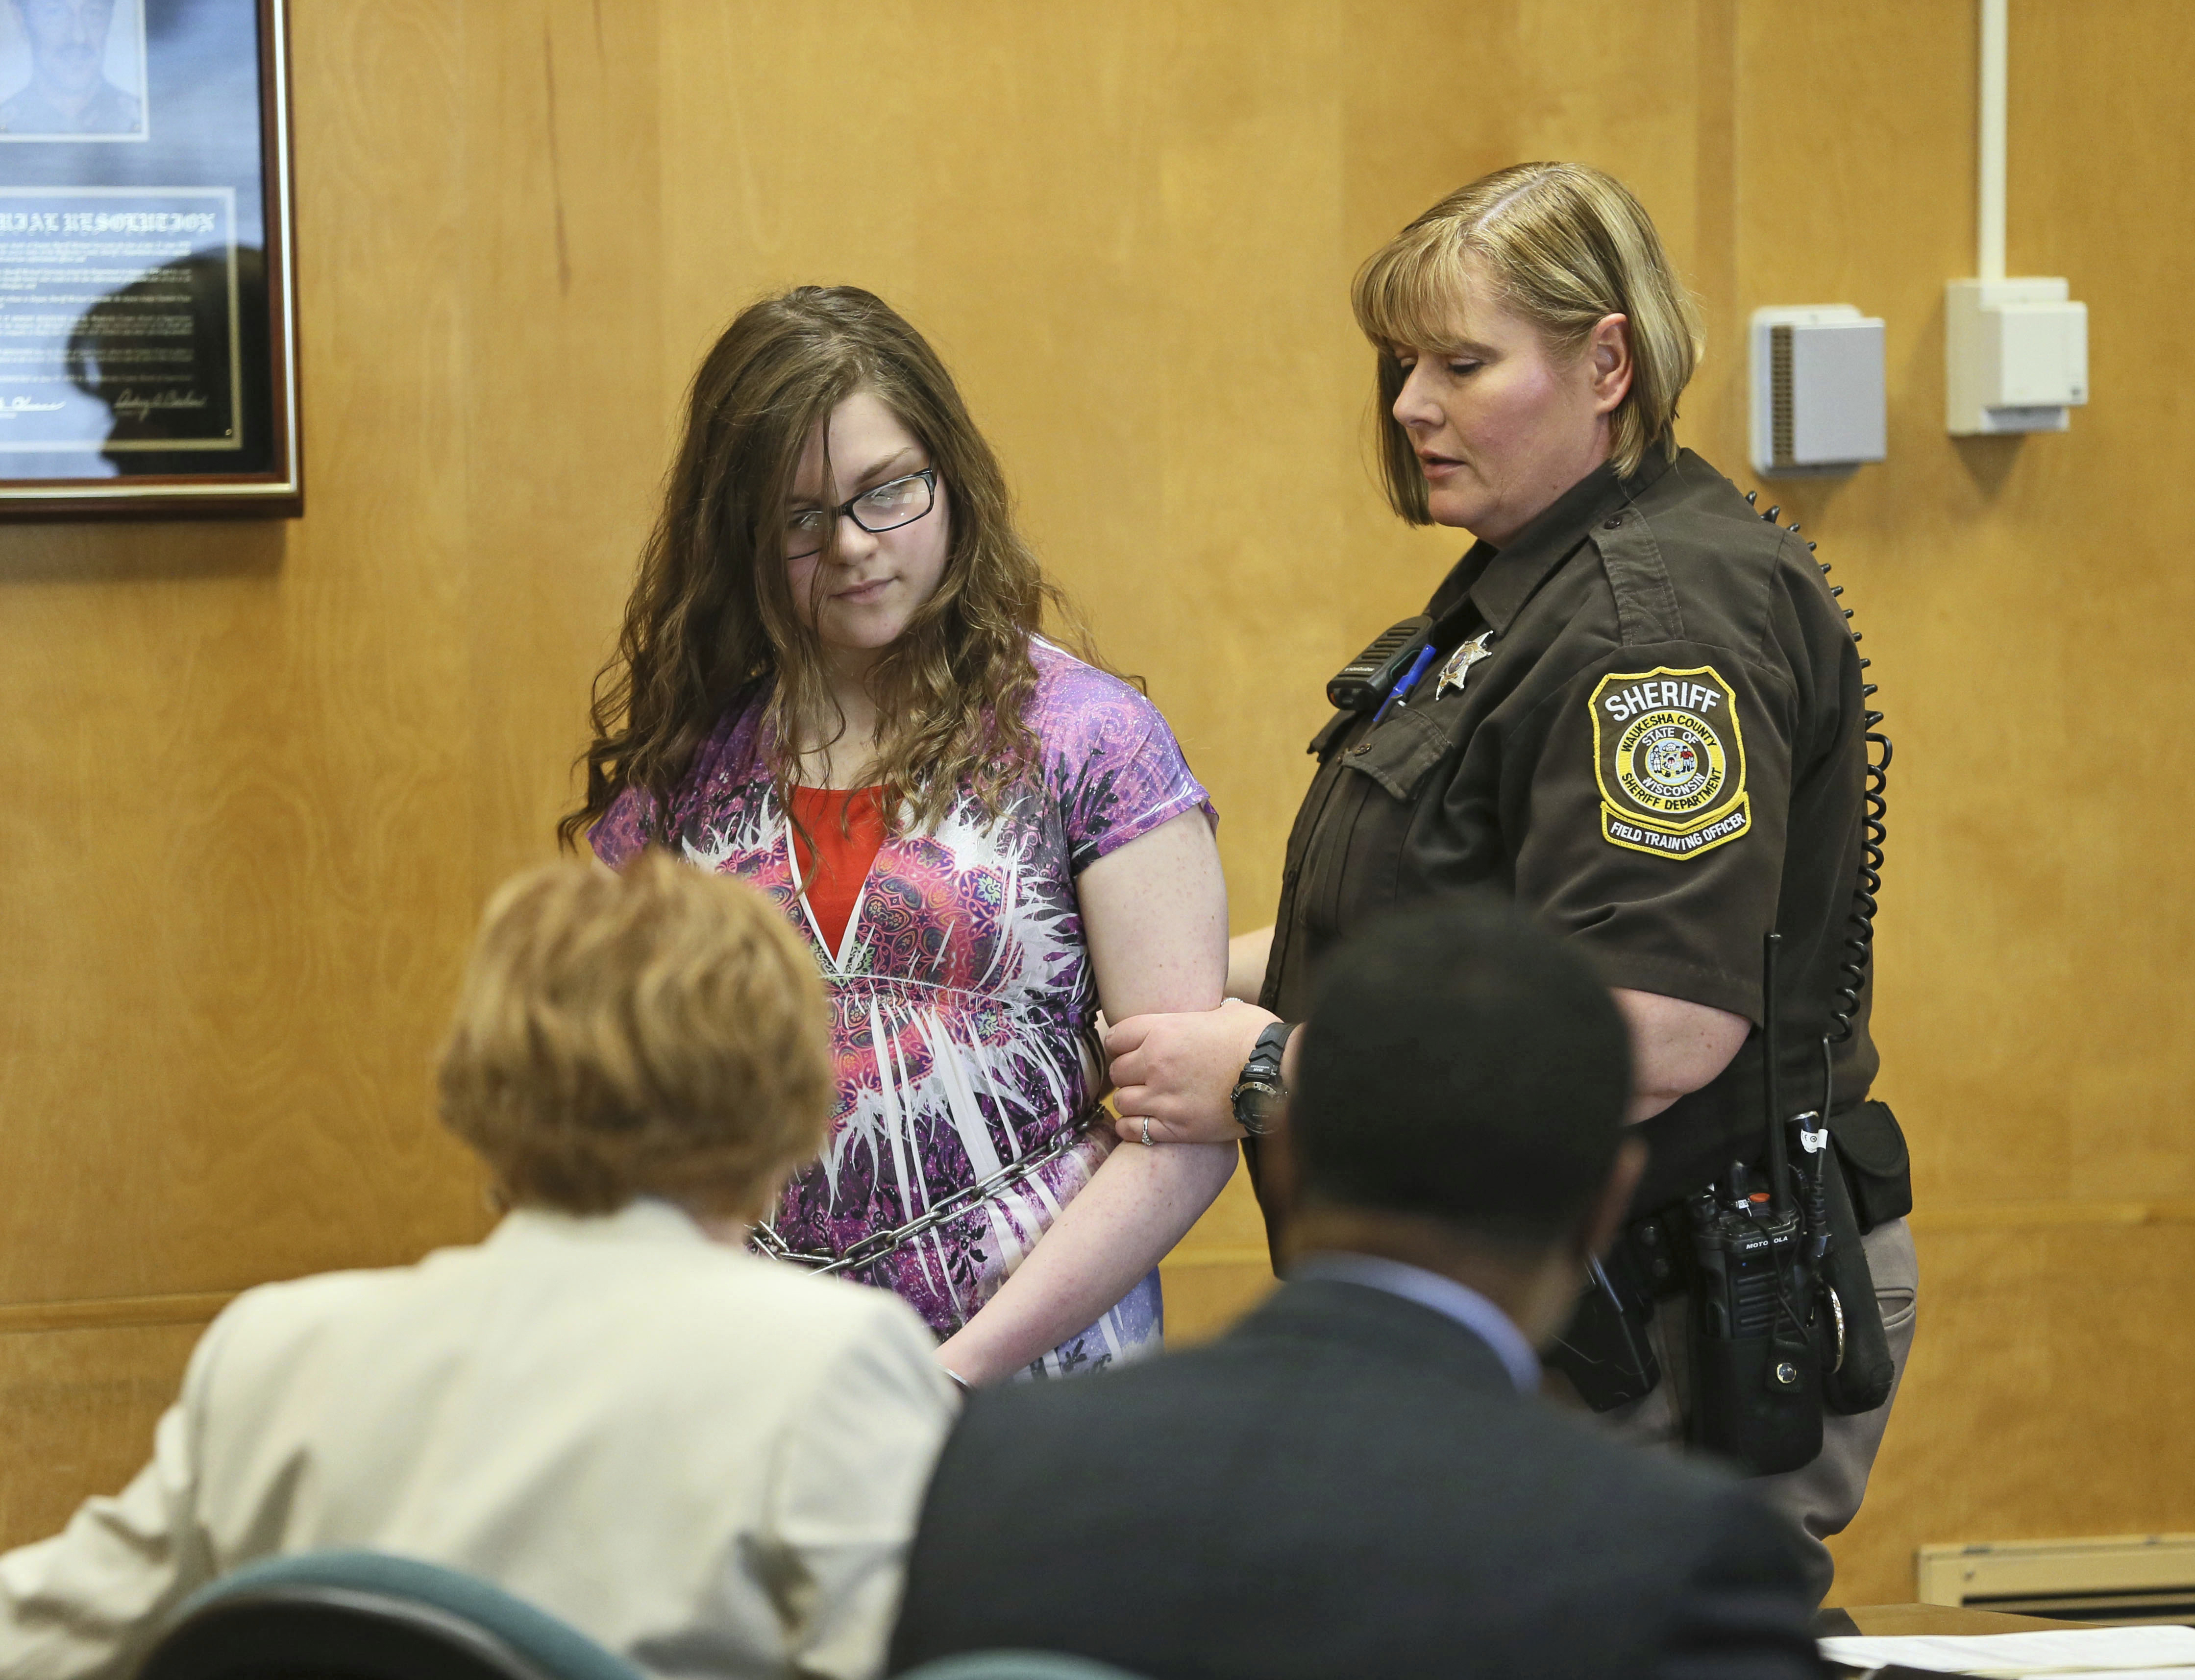 In a Monday, Feb. 20, 2017 file photo, Anissa Weier, 15, appears in court in Waukesha, Wis. Weier, one of two Wisconsin girls charged with repeatedly stabbing a classmate to impress the fictitious horror character Slender Man, pleaded guilty Aug. 21, 2017, to attempted second-degree homicide as a party to a crime, with use of a deadly weapon. (Michael Sears—Milwaukee Journal-Sentinel/AP)